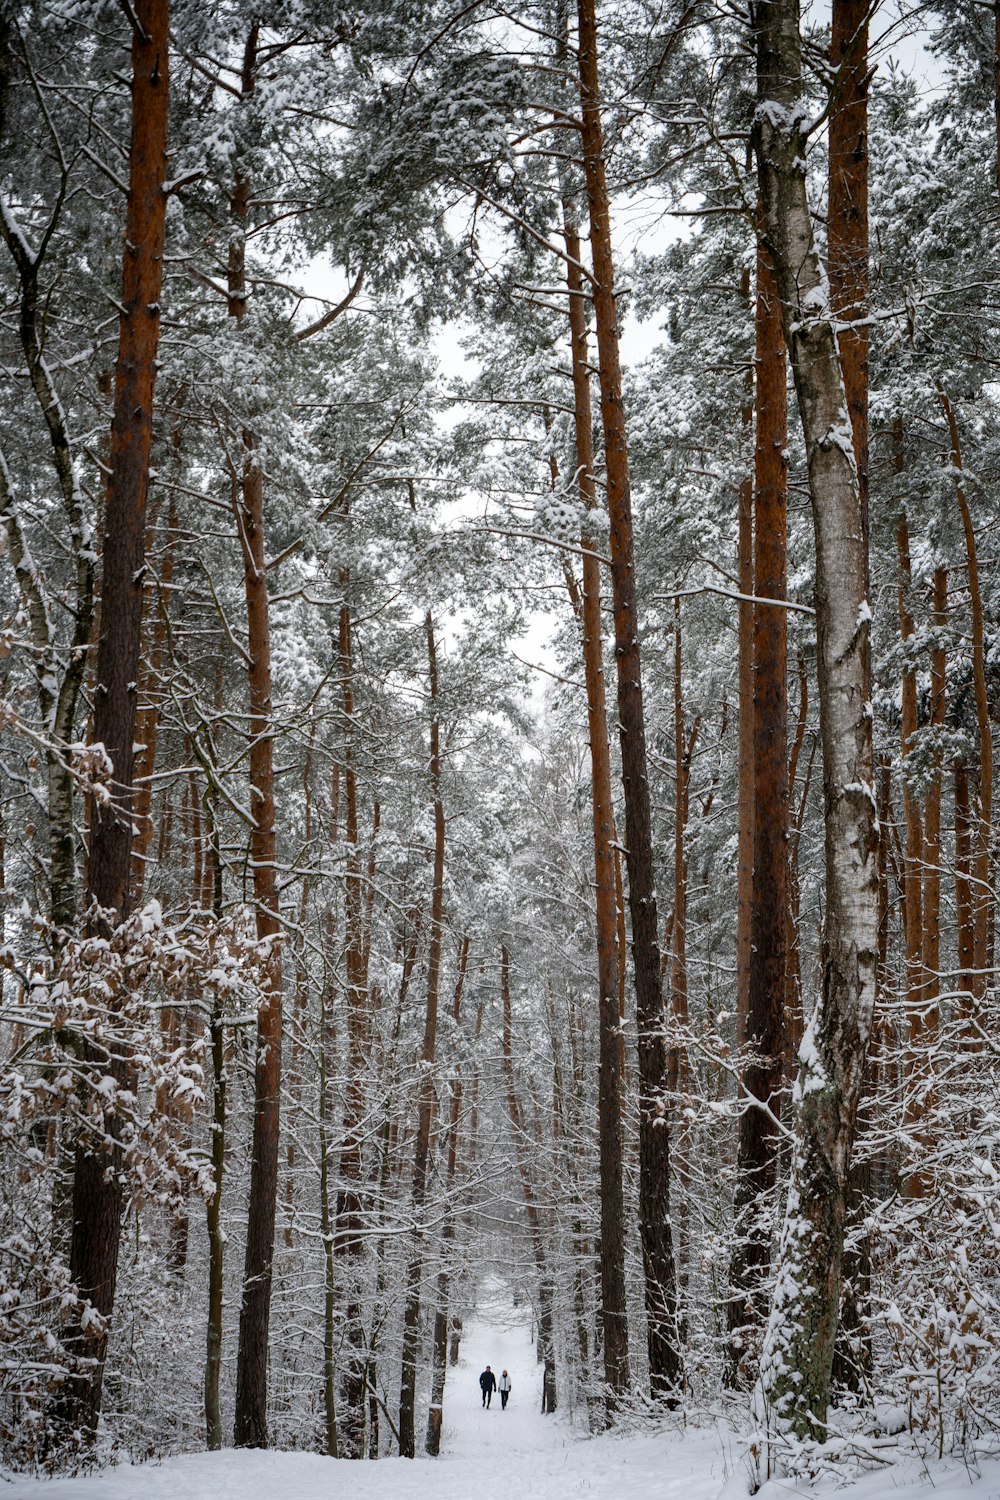 two people are walking through a snowy forest